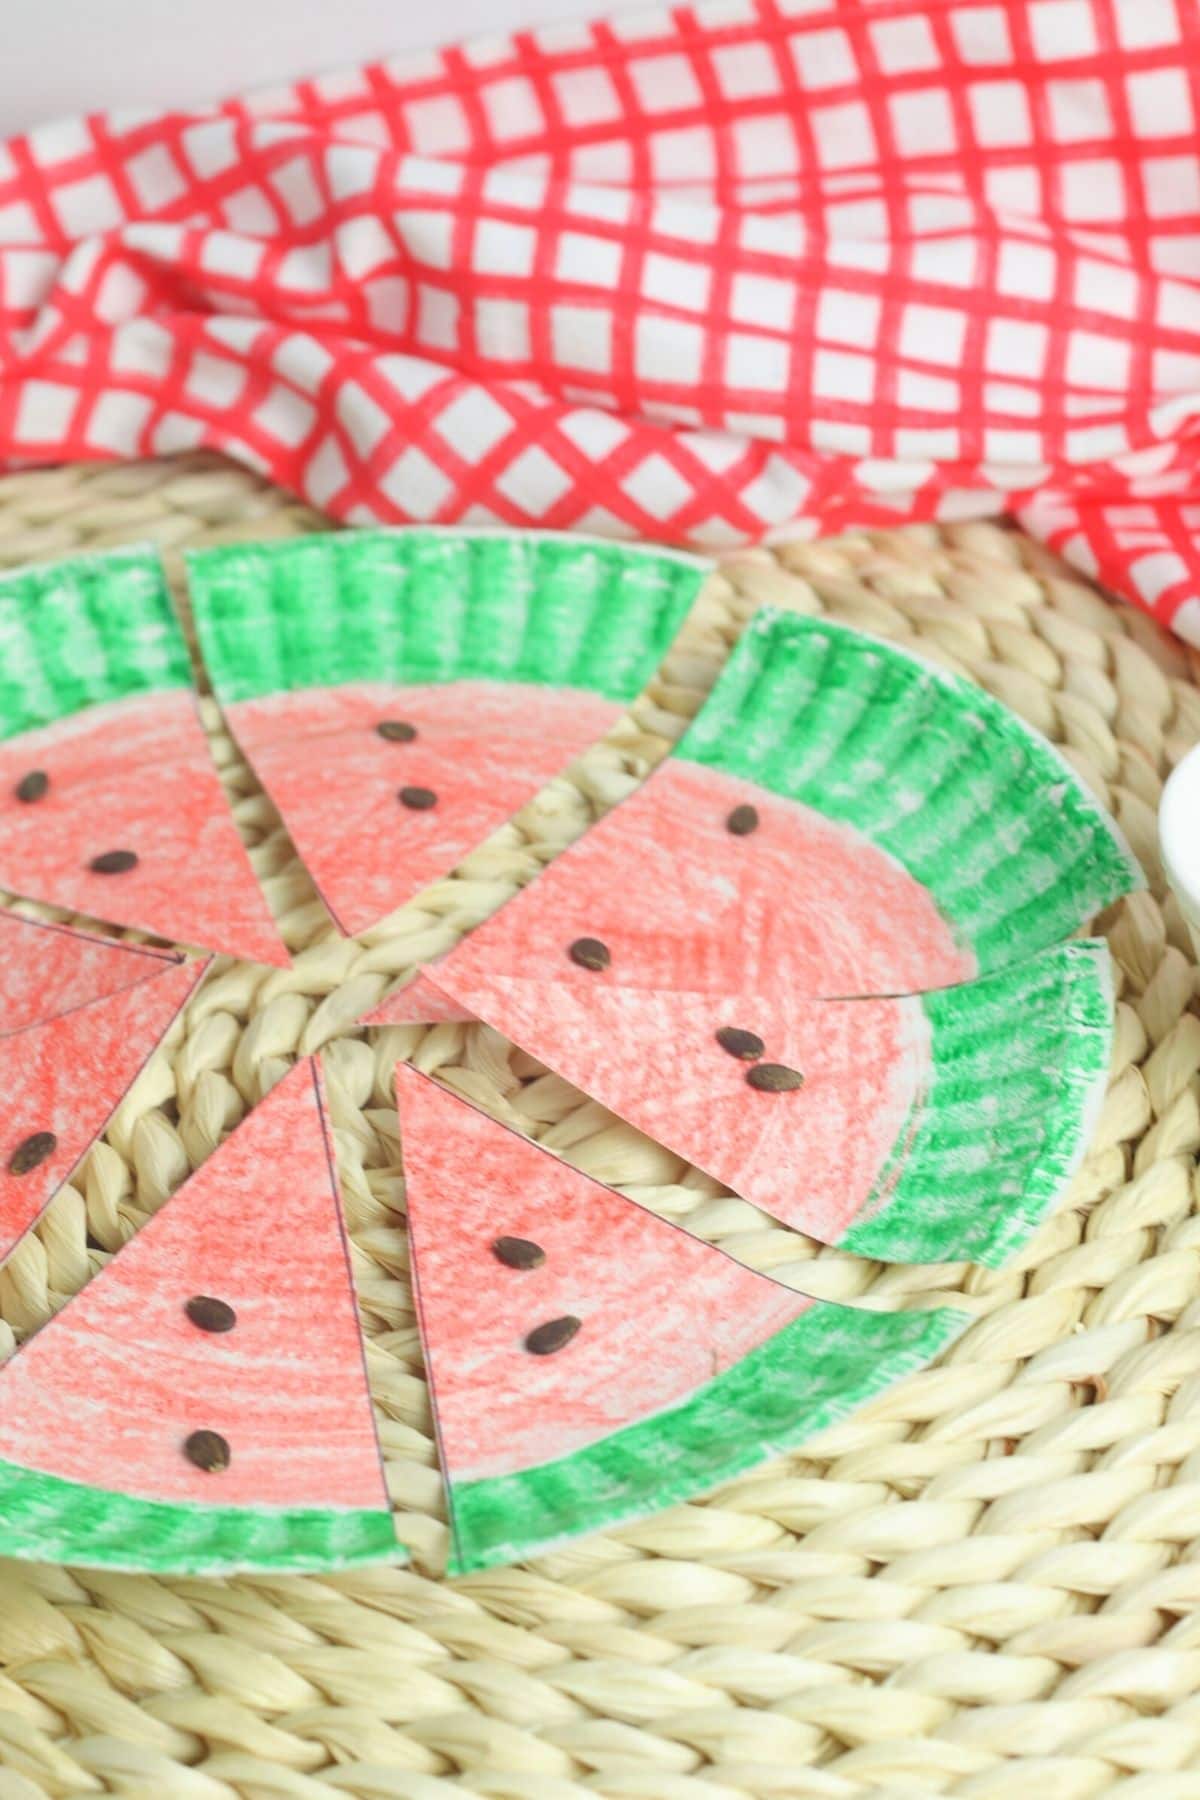 paper plate watermelon craft for kids